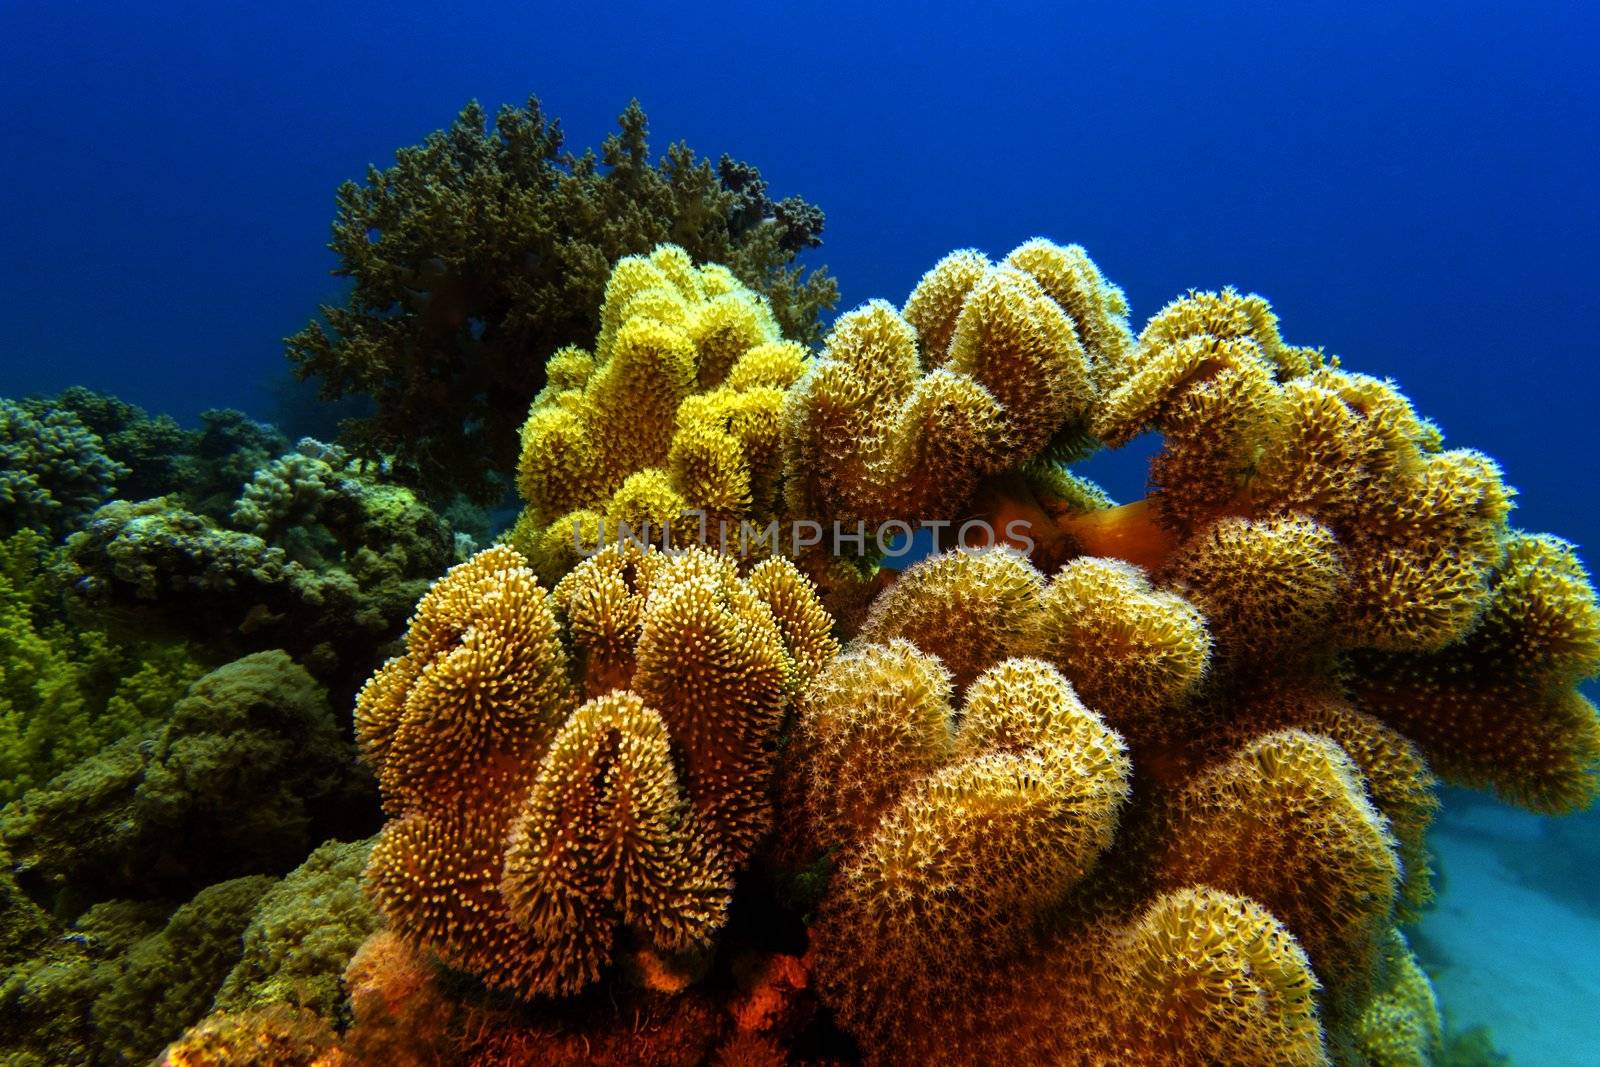 coral reef with great yellow soft coral at the bottom of red sea in egypt







coral reef with great yellow soft coral at the bottom of red sea